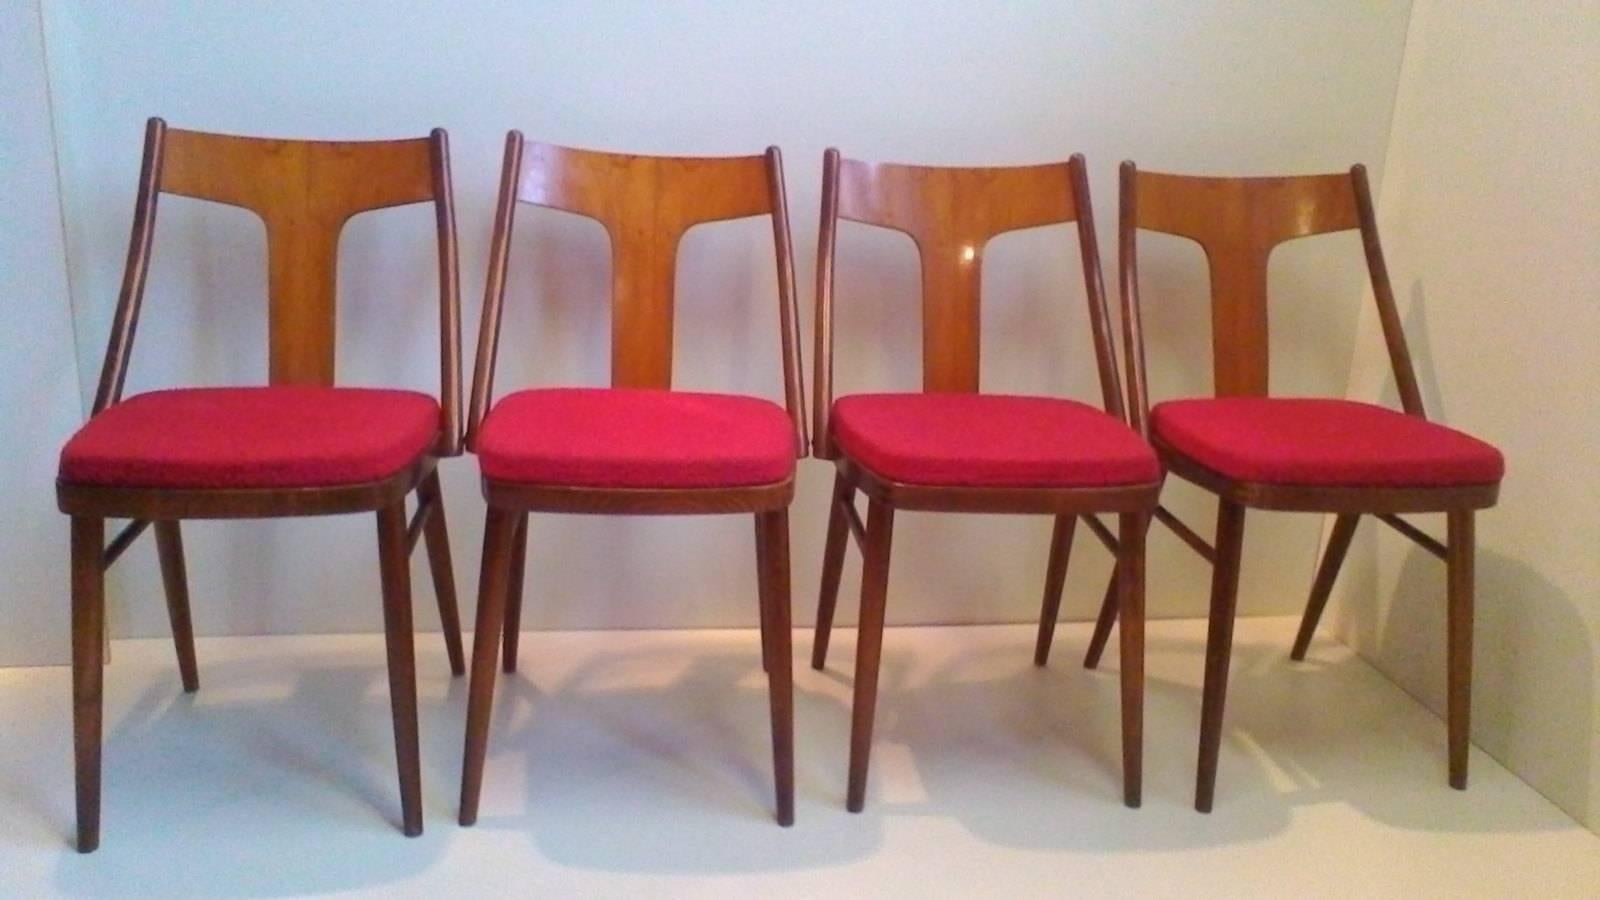 A set of four Art Deco armchairs in walnut and beech. The chairs were produced during 1960s in Czechoslovakia and are in original very good condition.